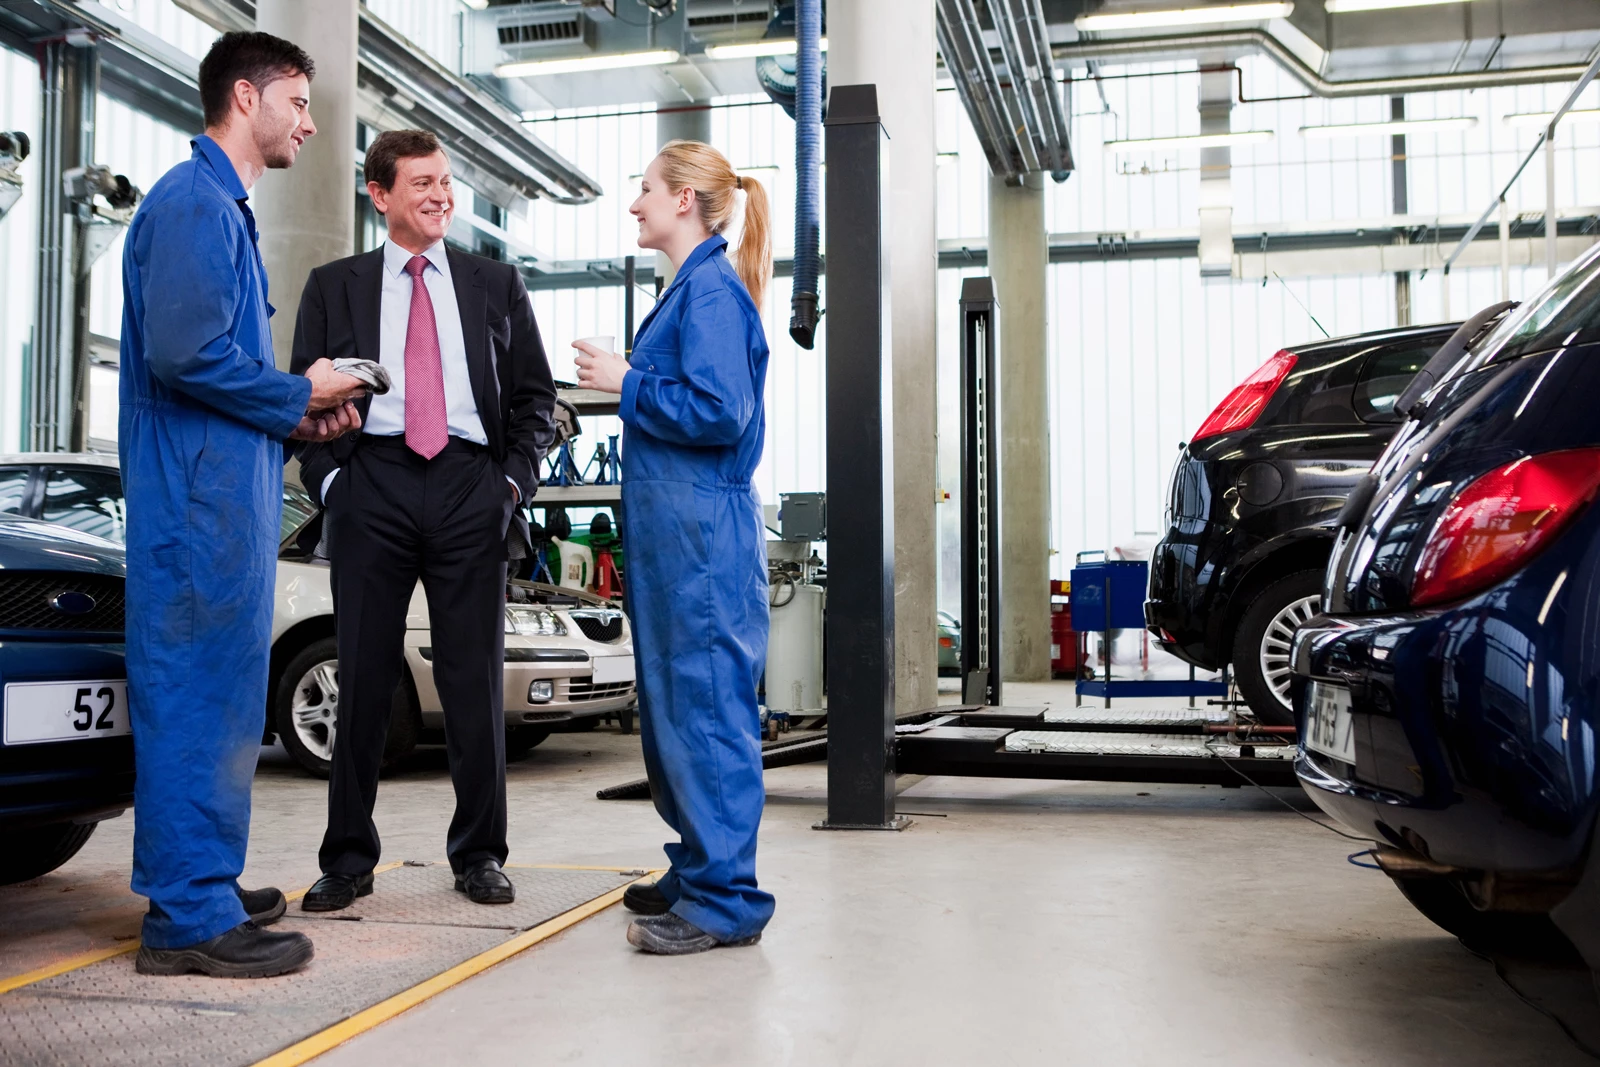 Two training MOT testers standing with the business owner in a busy garage workshop